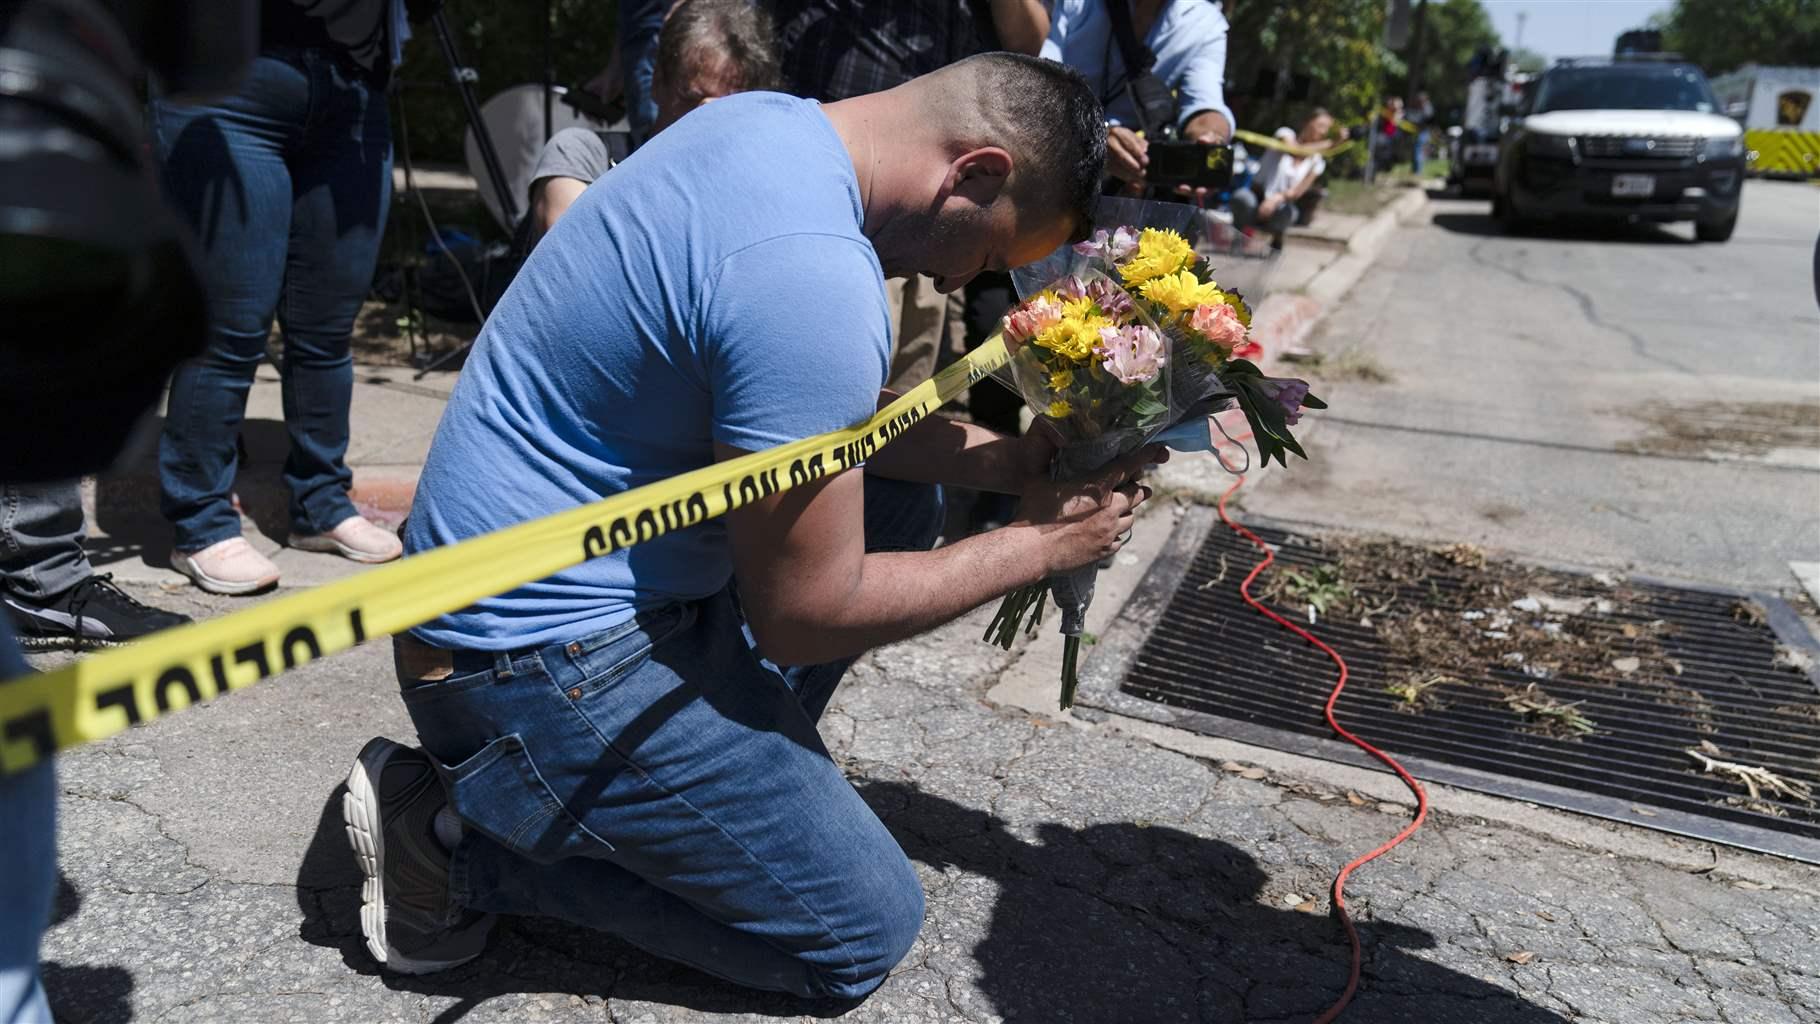 Joseph Avila prays while holding flowers honoring the victims killed in Tuesday’s shooting at Robb Elementary School in Uvalde, Texas, Wednesday, May 25, 2022. Desperation turned to heart-wrenching sorrow for families of grade schoolers killed after an 18-year-old gunman barricaded himself in their Texas classroom and began shooting, killing at least 19 fourth-graders and their two teachers. (AP Photo/Jae C. Hong)